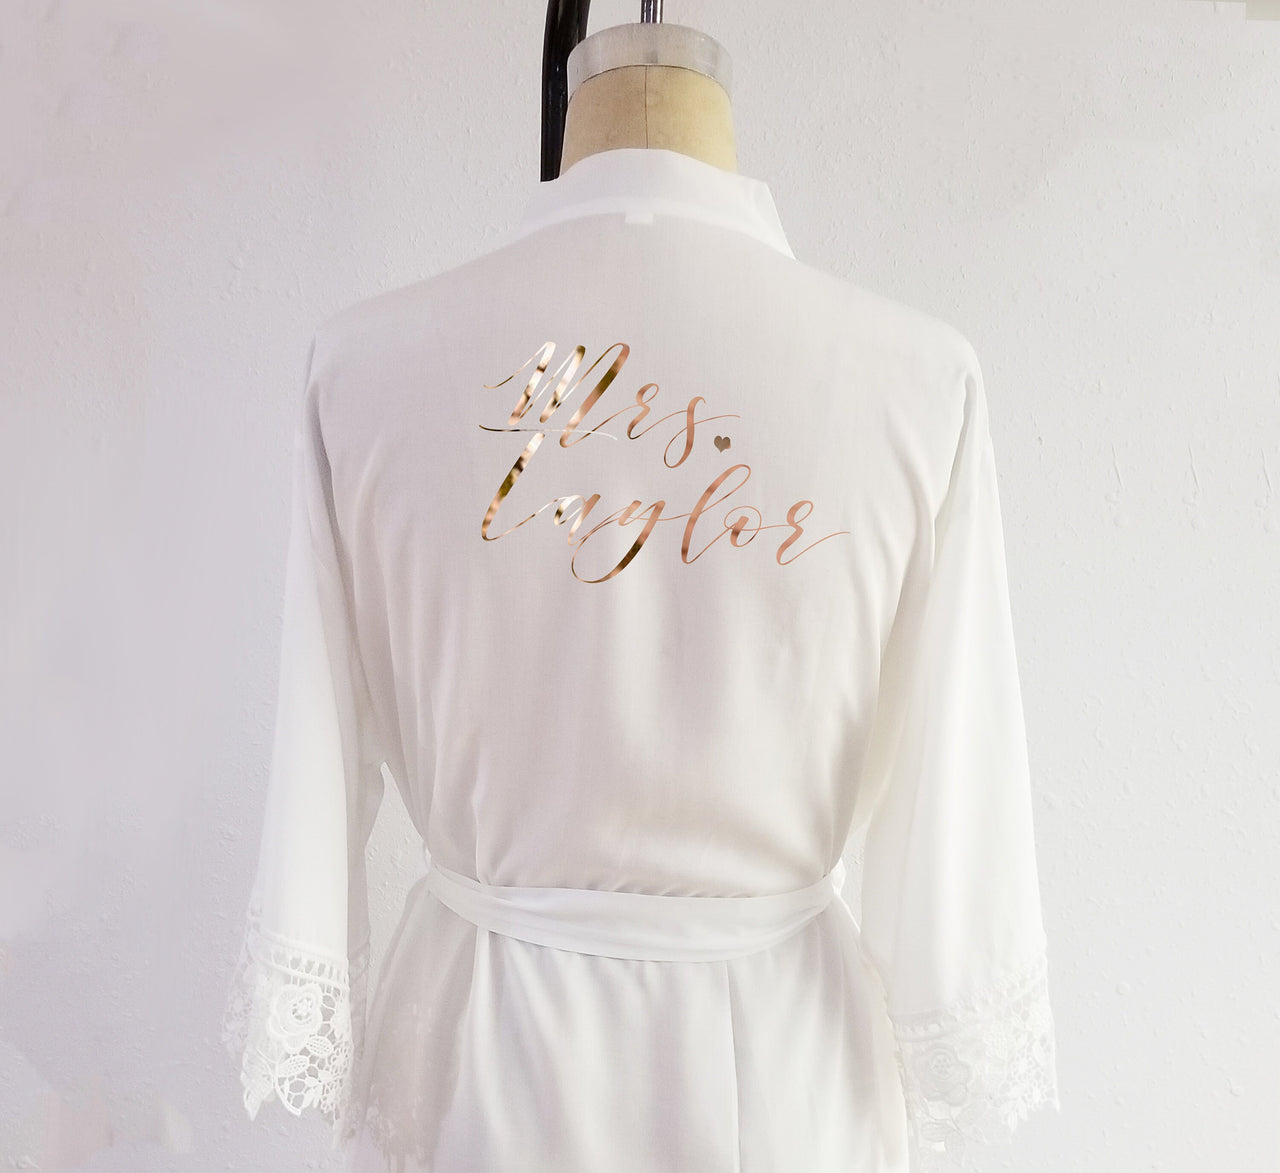 Bridal robe with lace